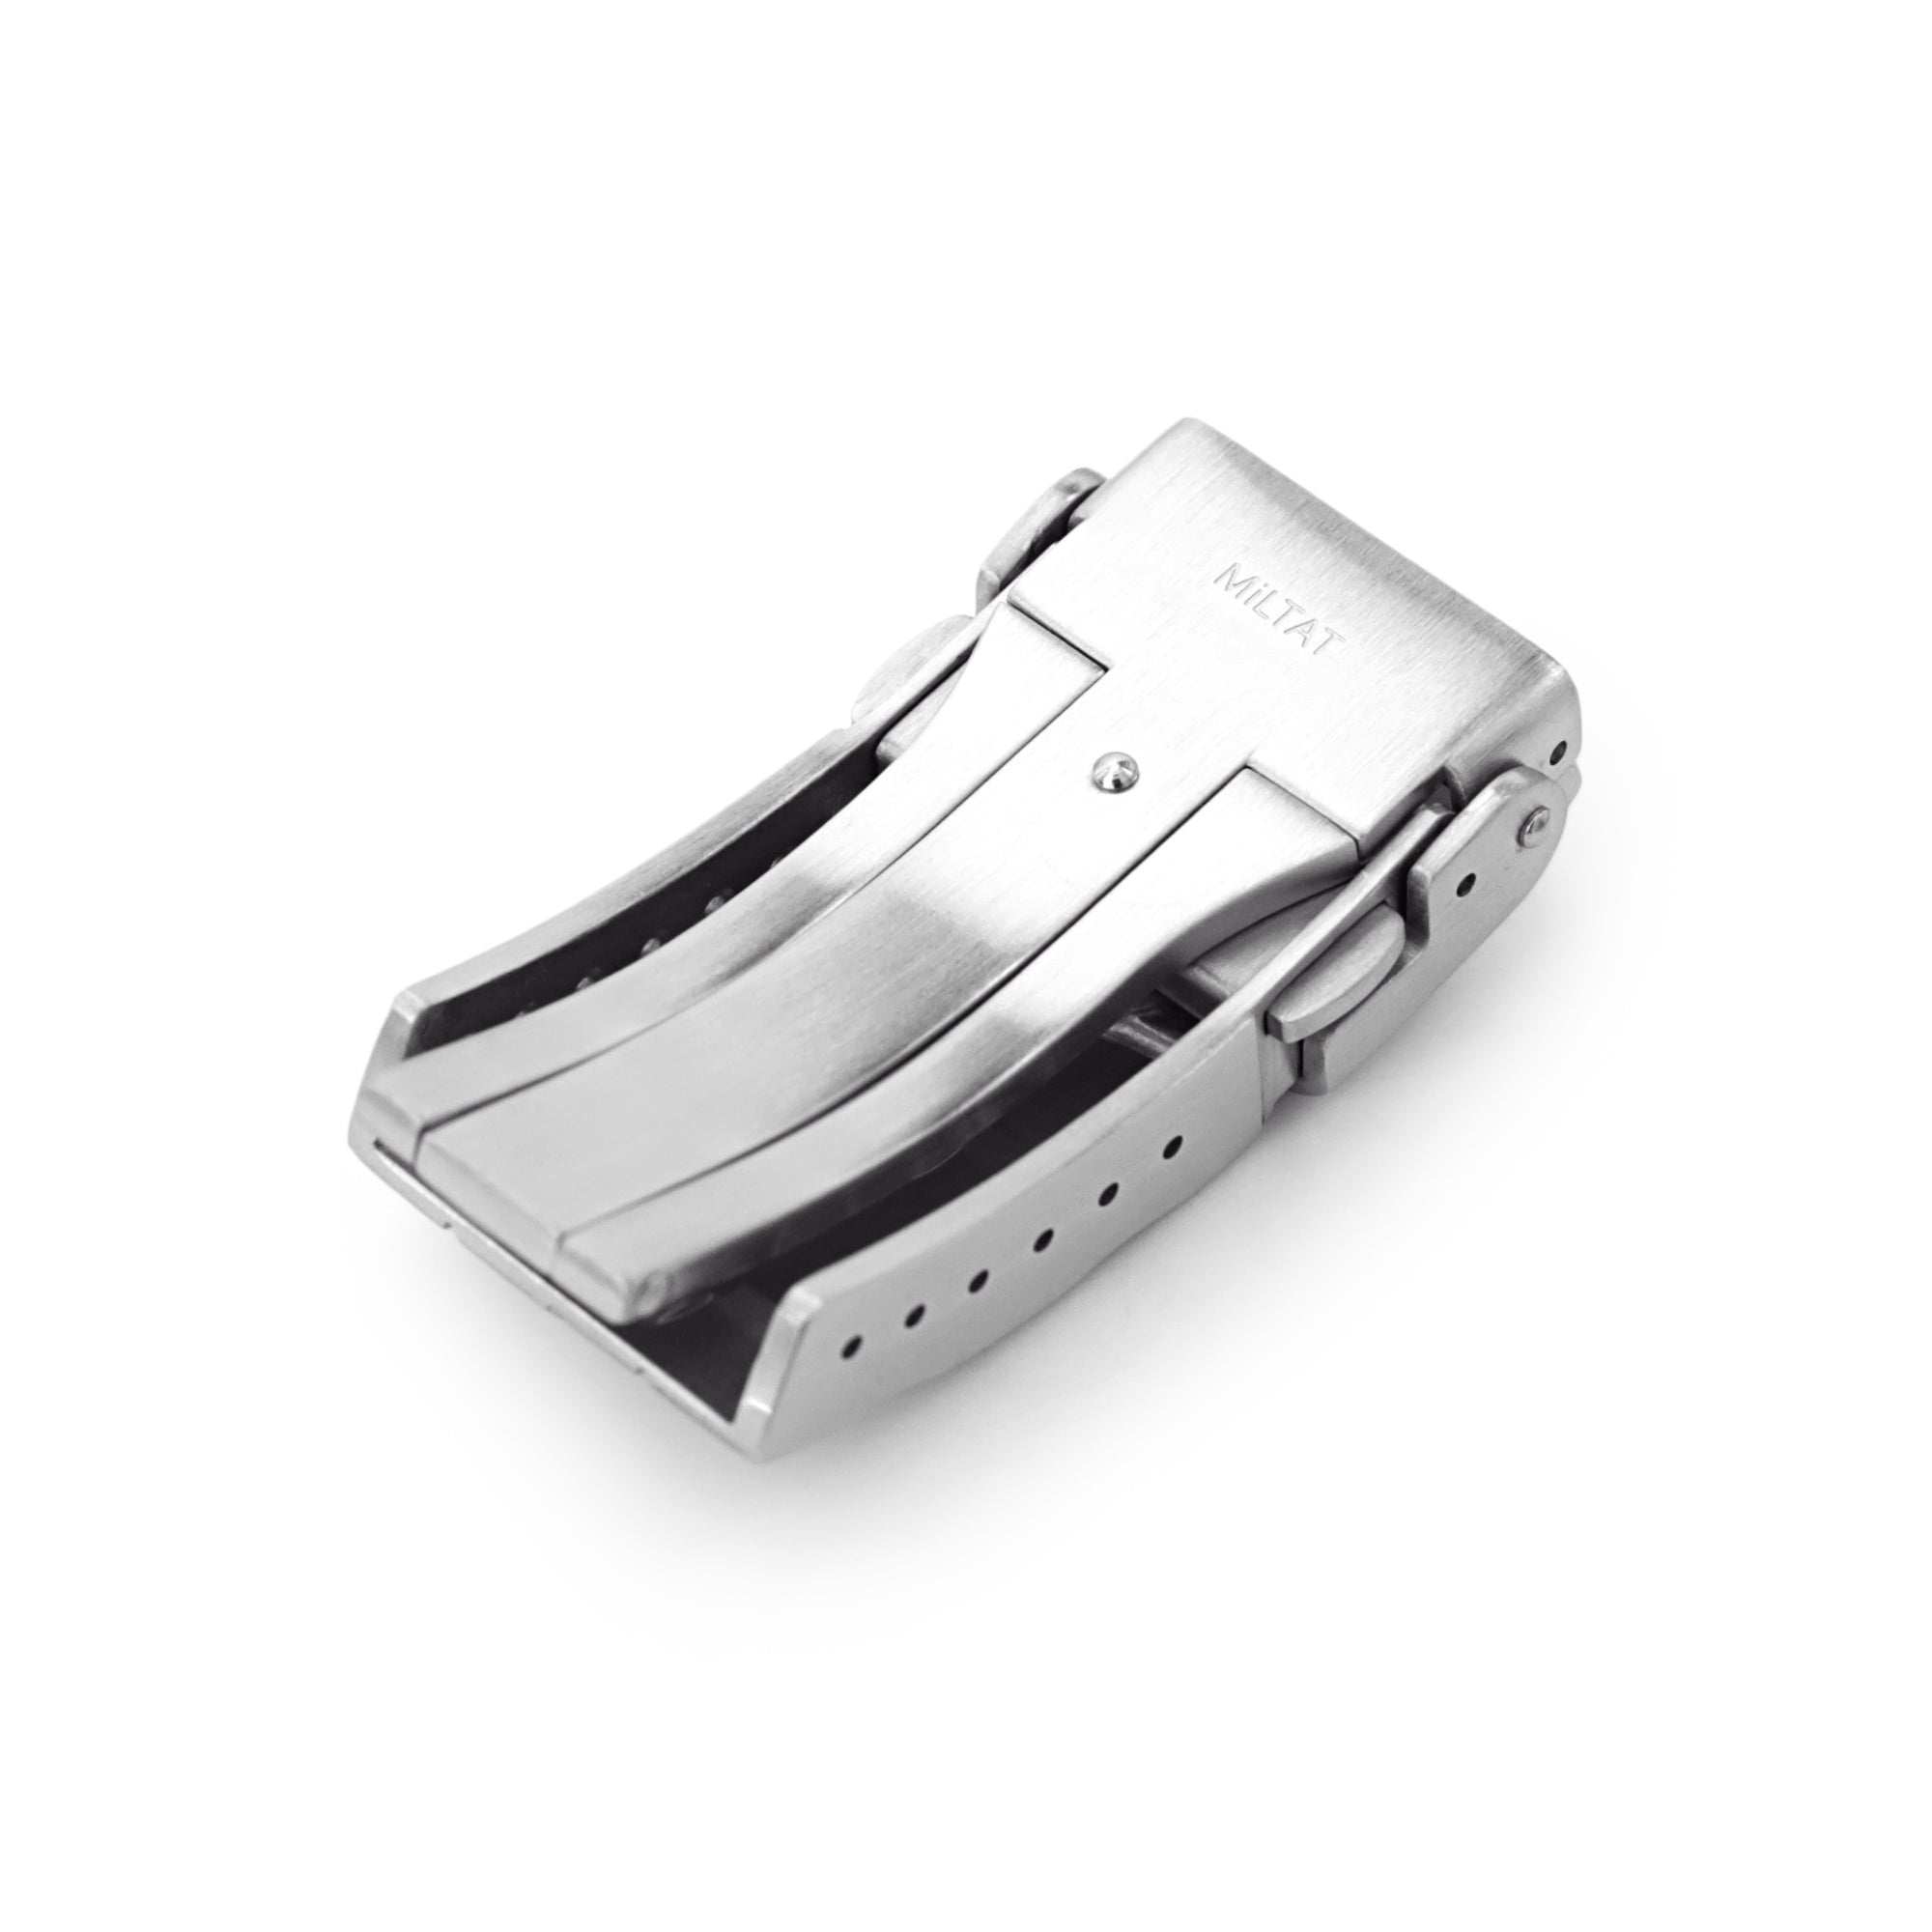 Solid 316L Stainless Steel Double Locks SUB Diver Clasp, Button